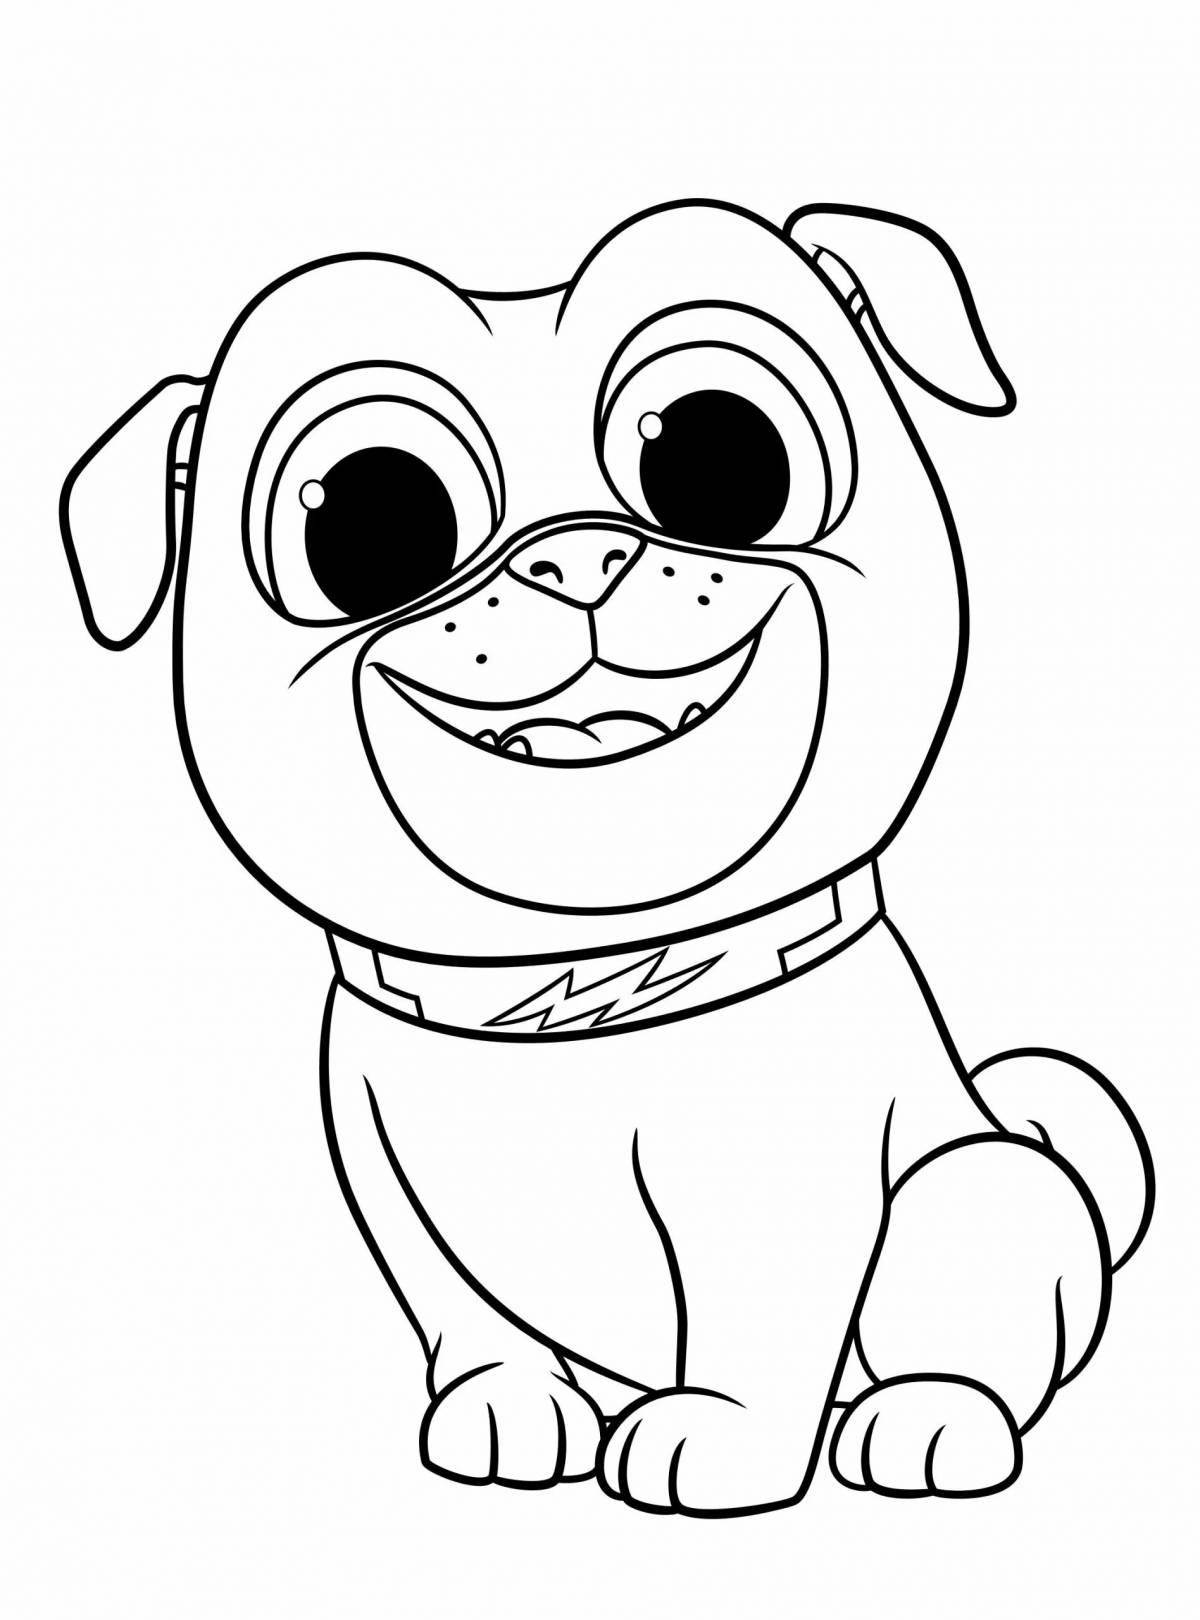 Dog coloring pages for boys